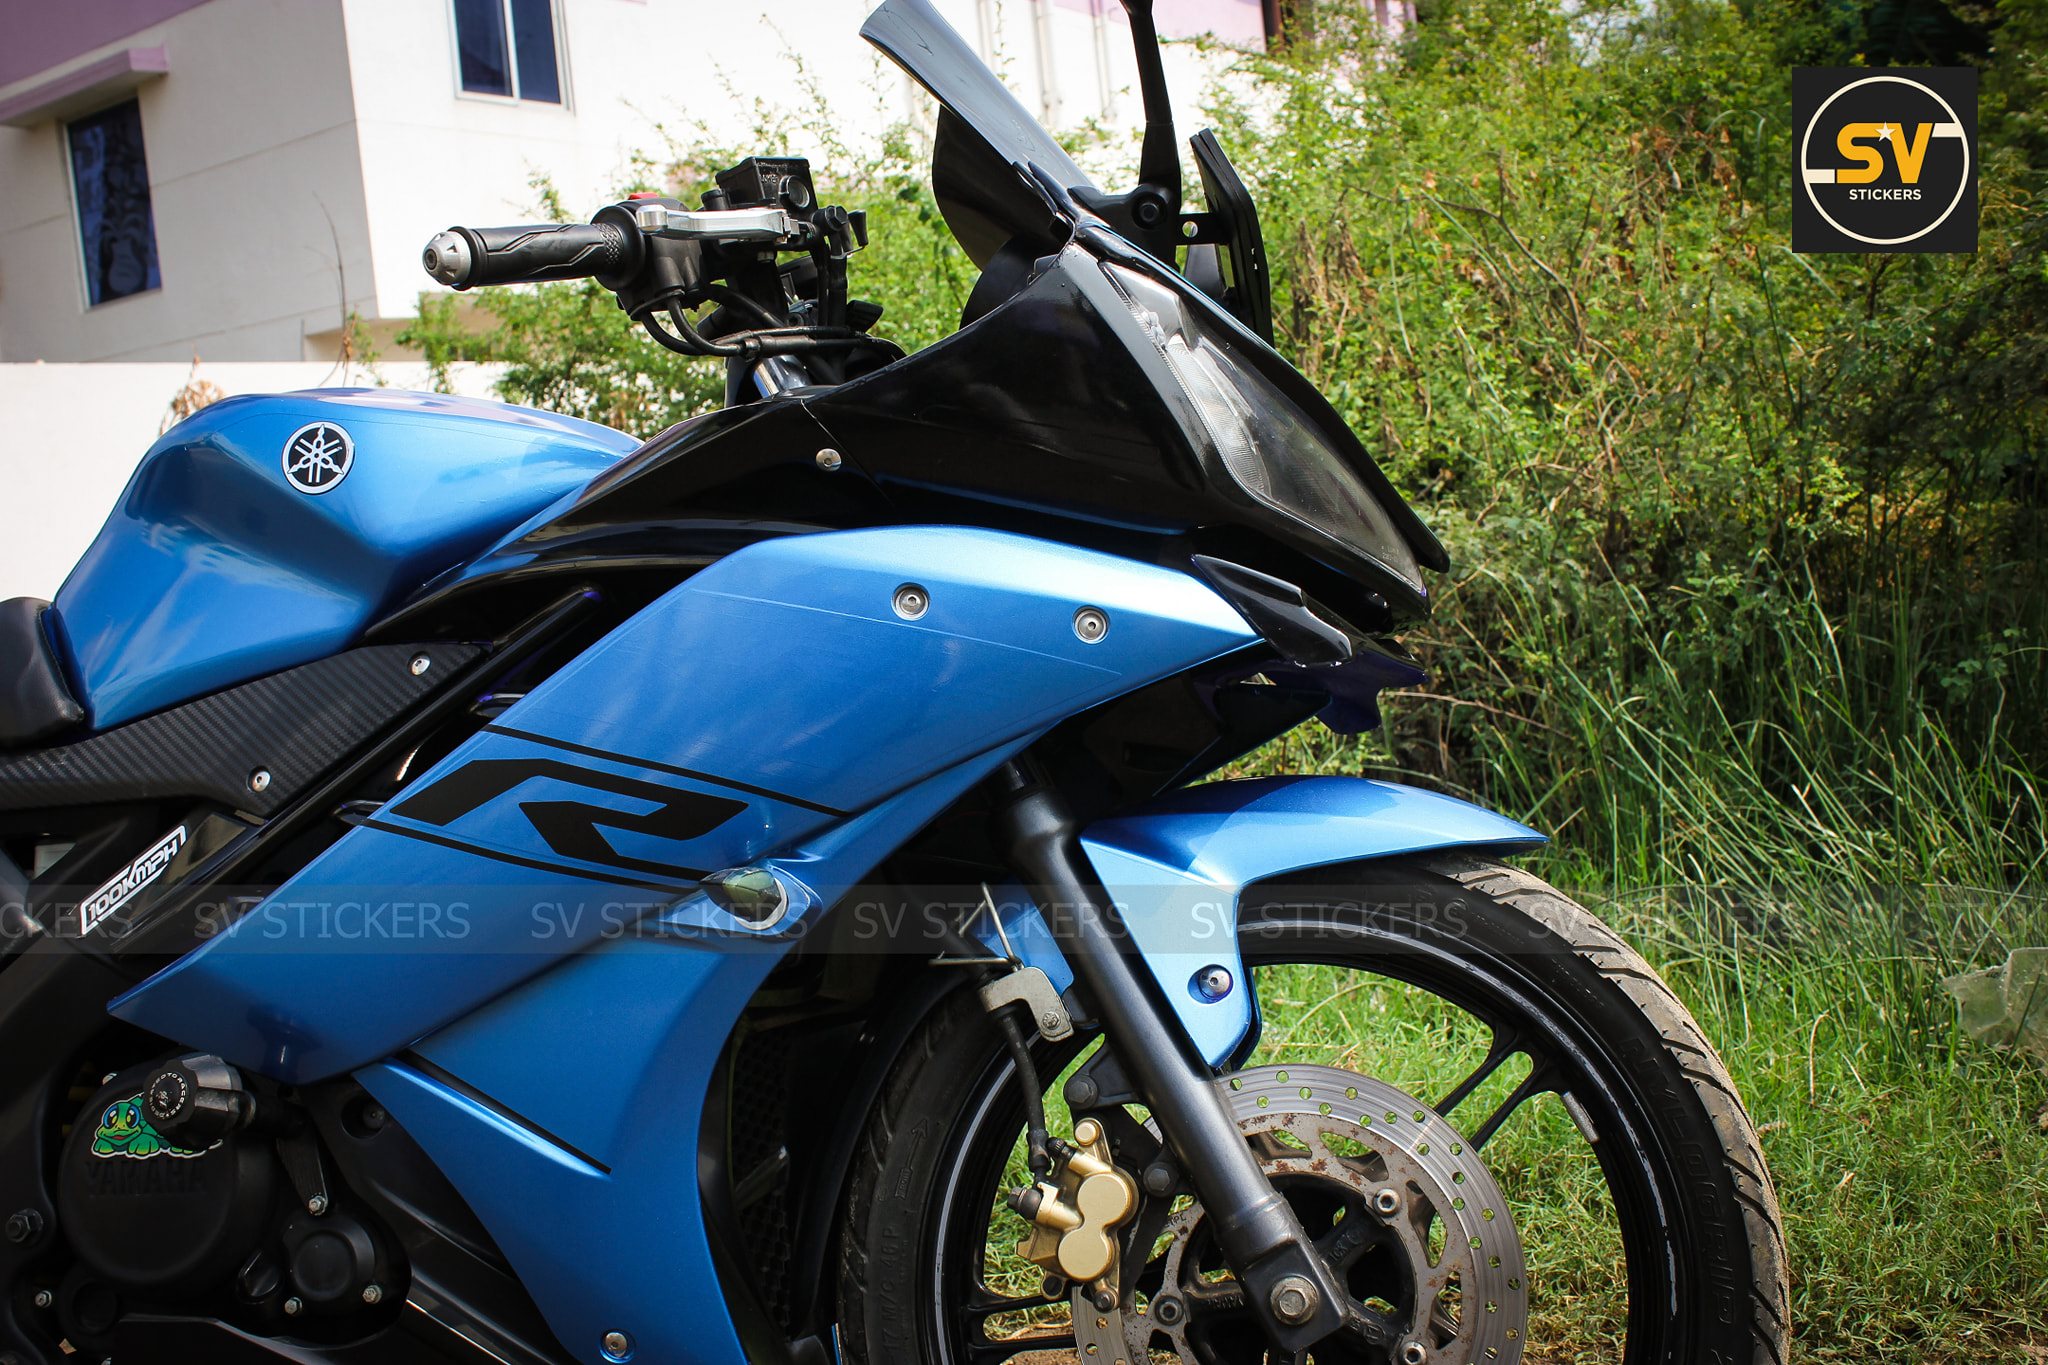 Meet Bright Blue Yamaha R15 Version 2.0 by SV Stickers - background